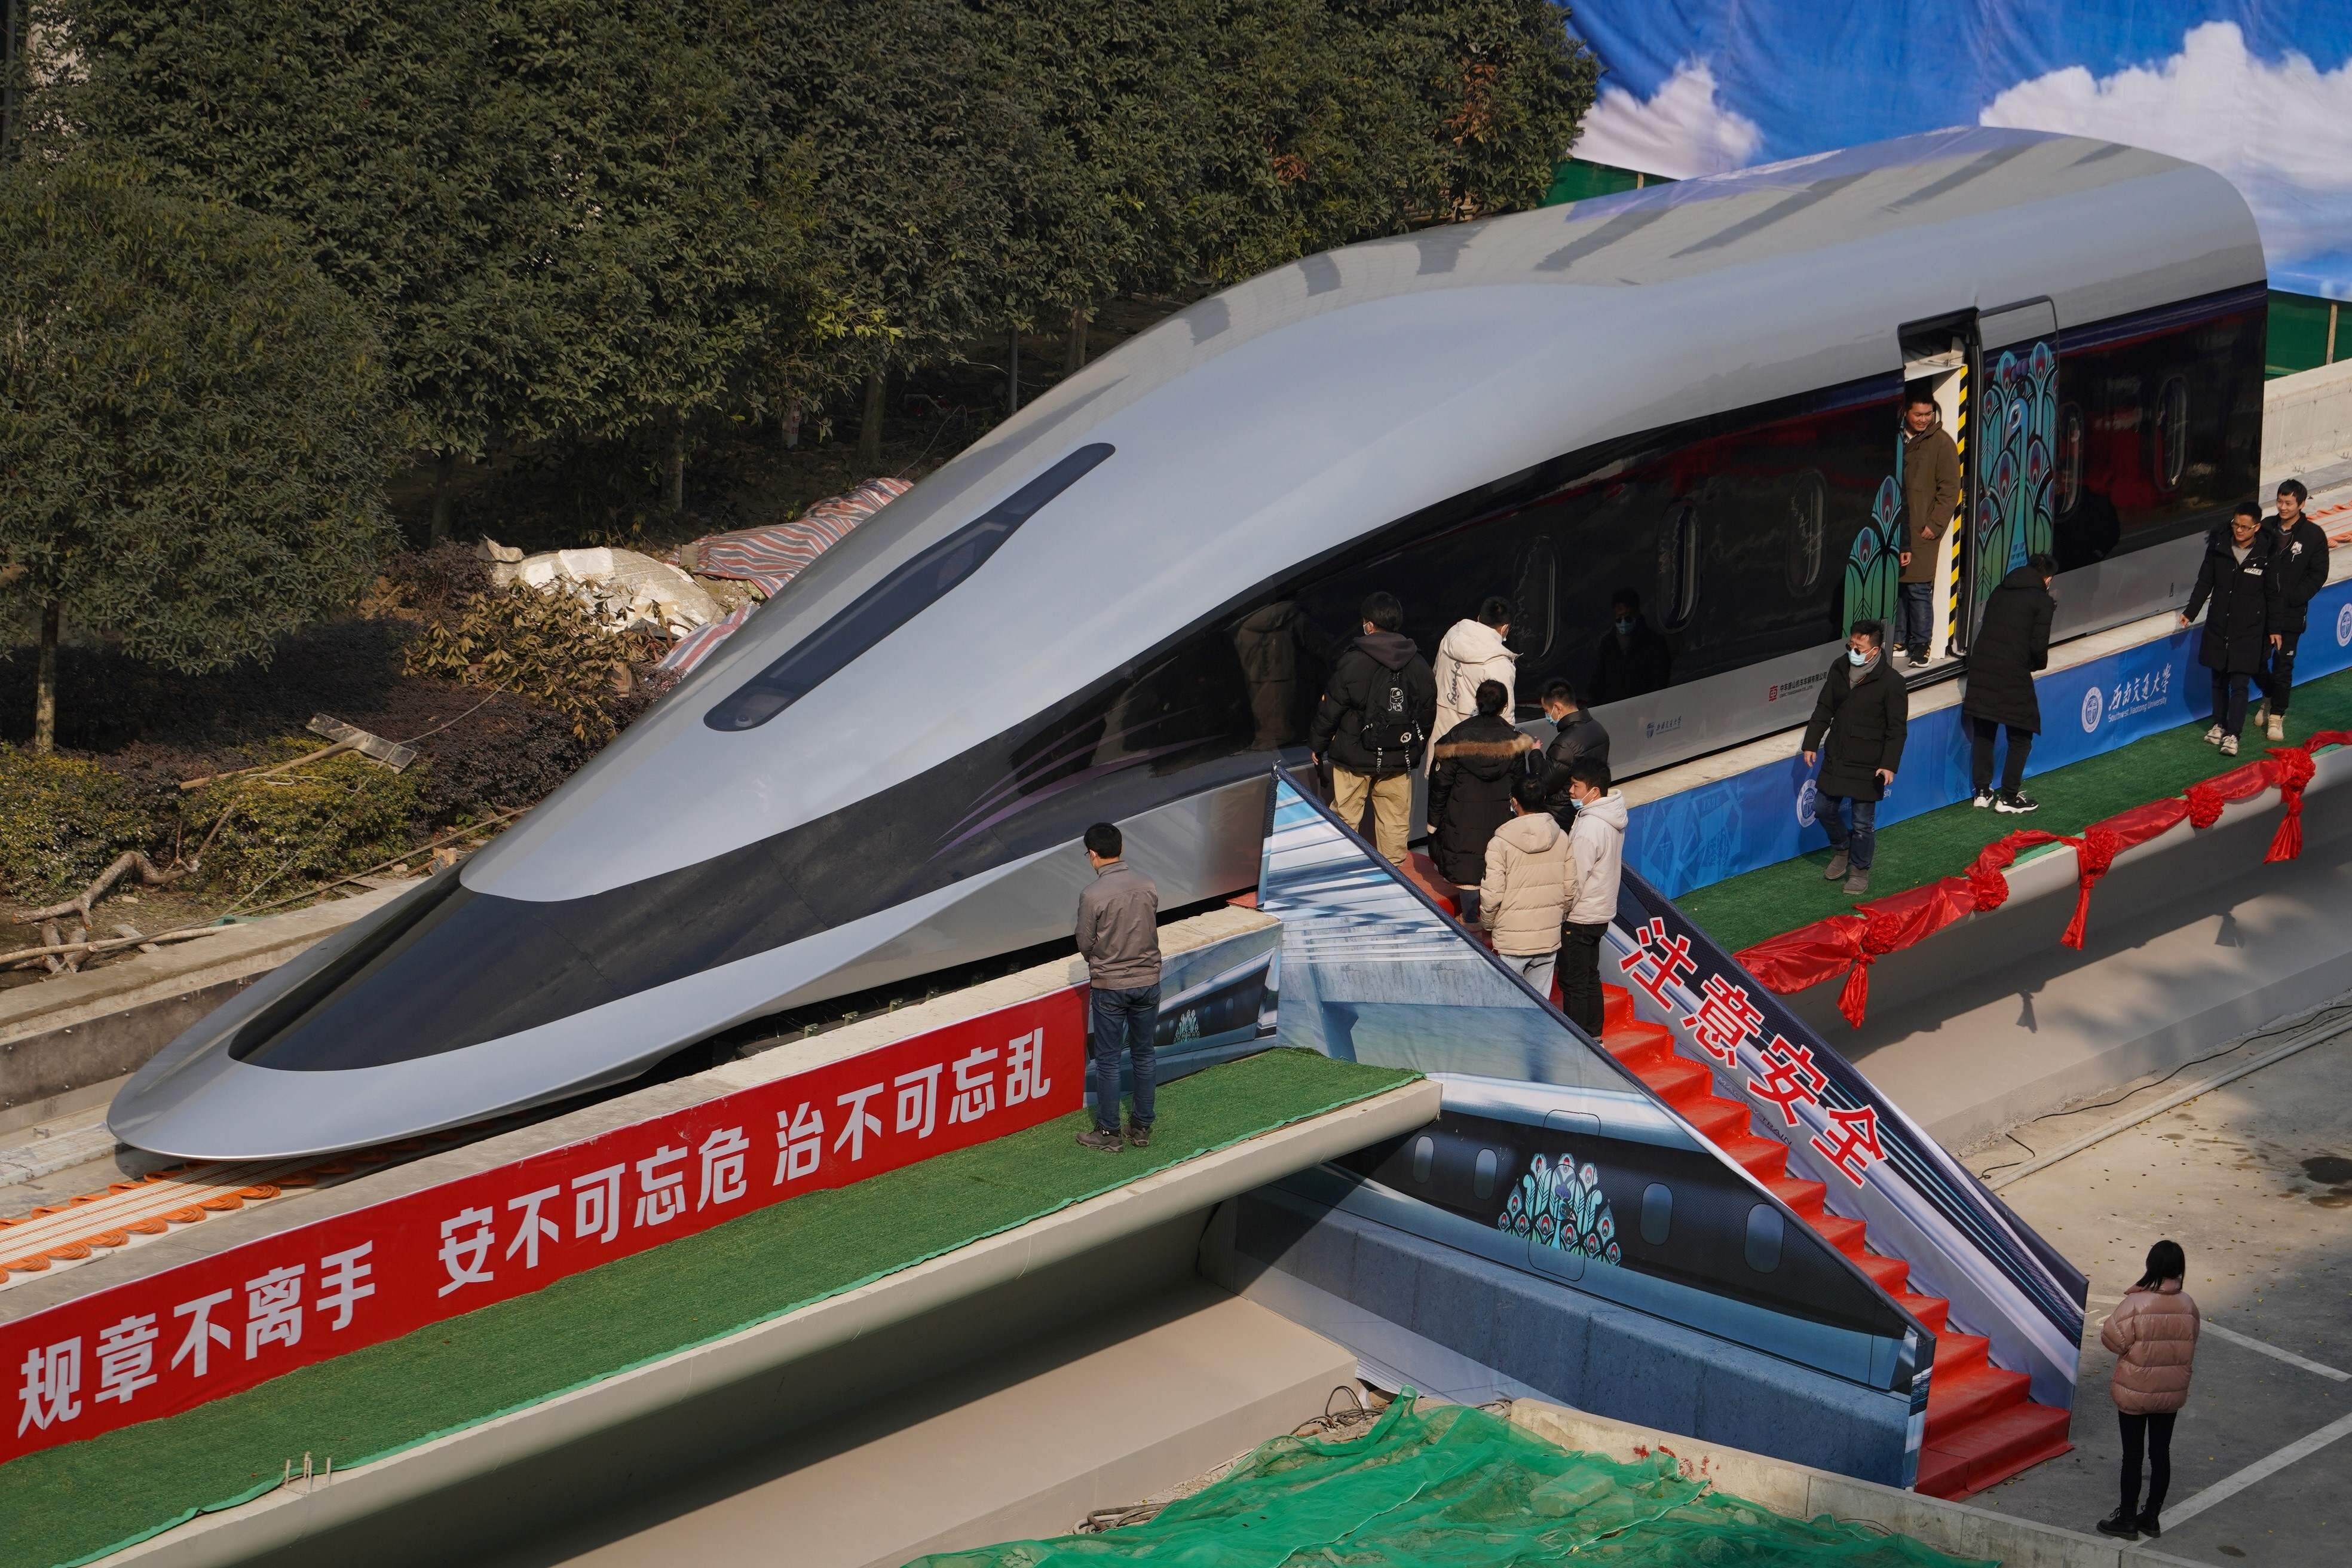 People inspect a prototype magnetic levitation train developed with high-temperature superconducting maglev technology in Chengdu, Sichuan province, on Wednesday. Photo: AFP